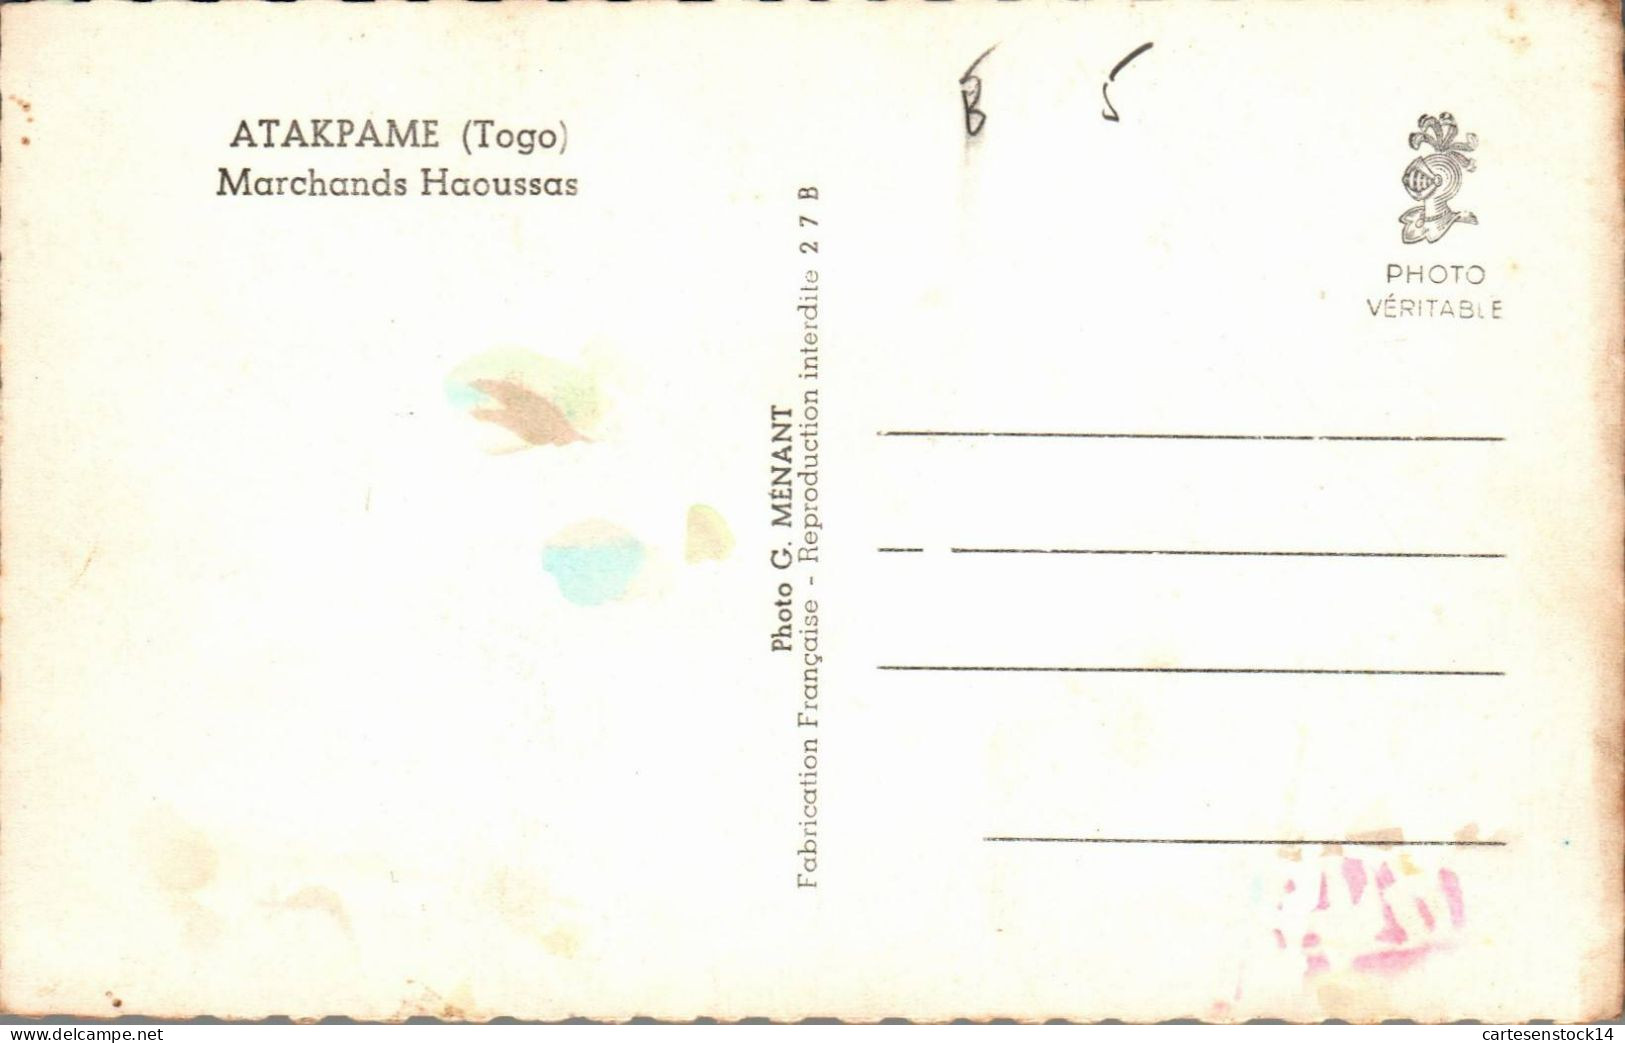 N°2001 W -cpsm Atakpame -marchands Haoussas- - Togo